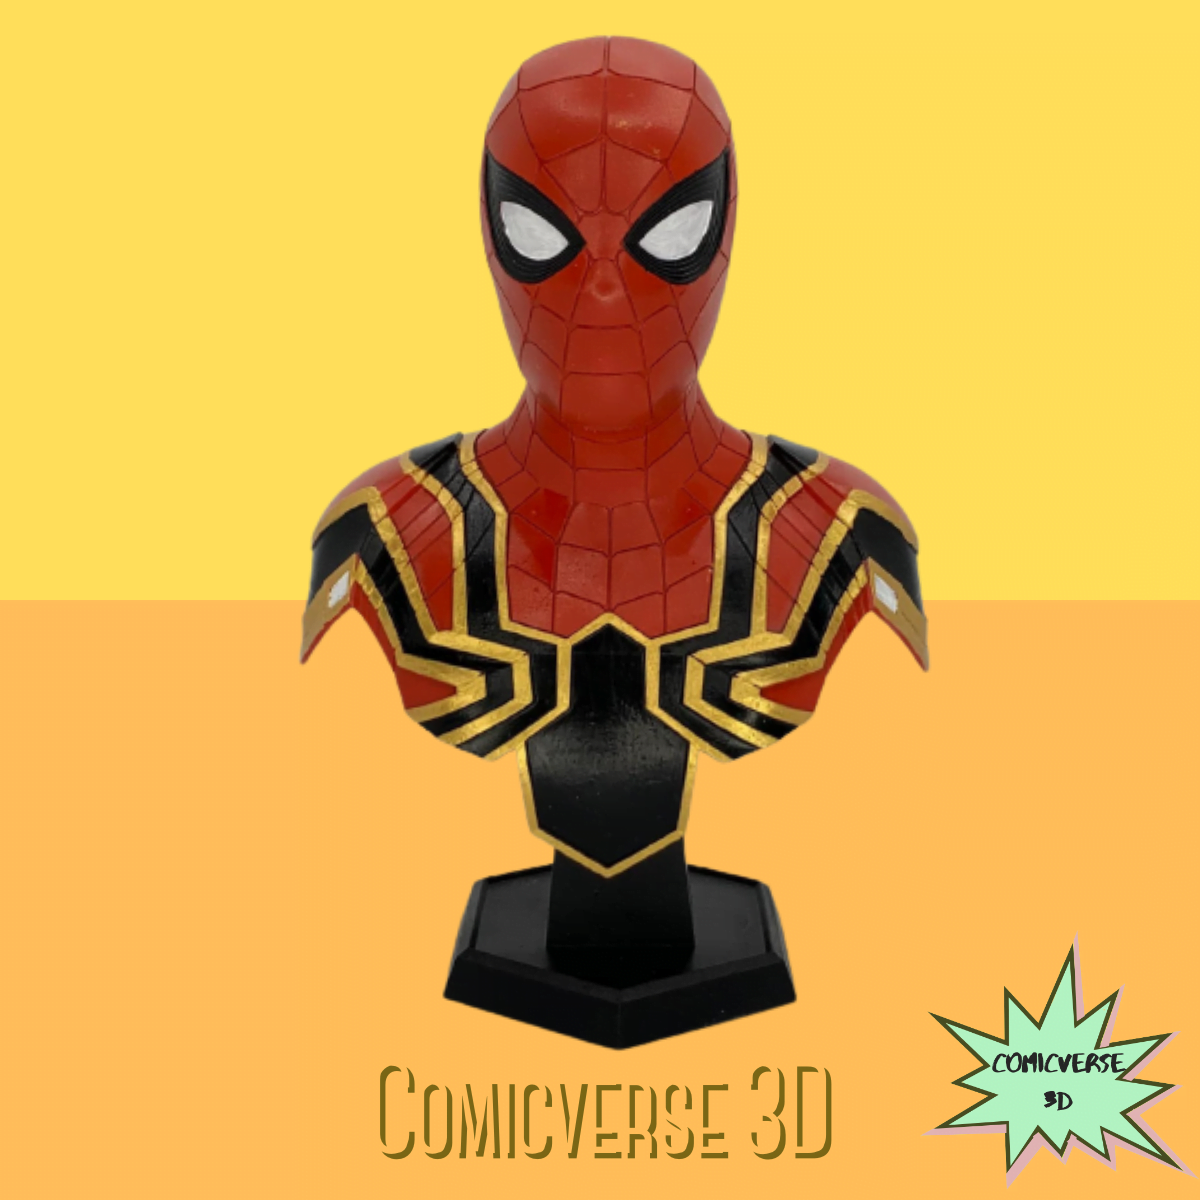 Iron Spider Suit from Avengers Infinity War Movie Display Figurine Tom Holland Peter Parker Statue